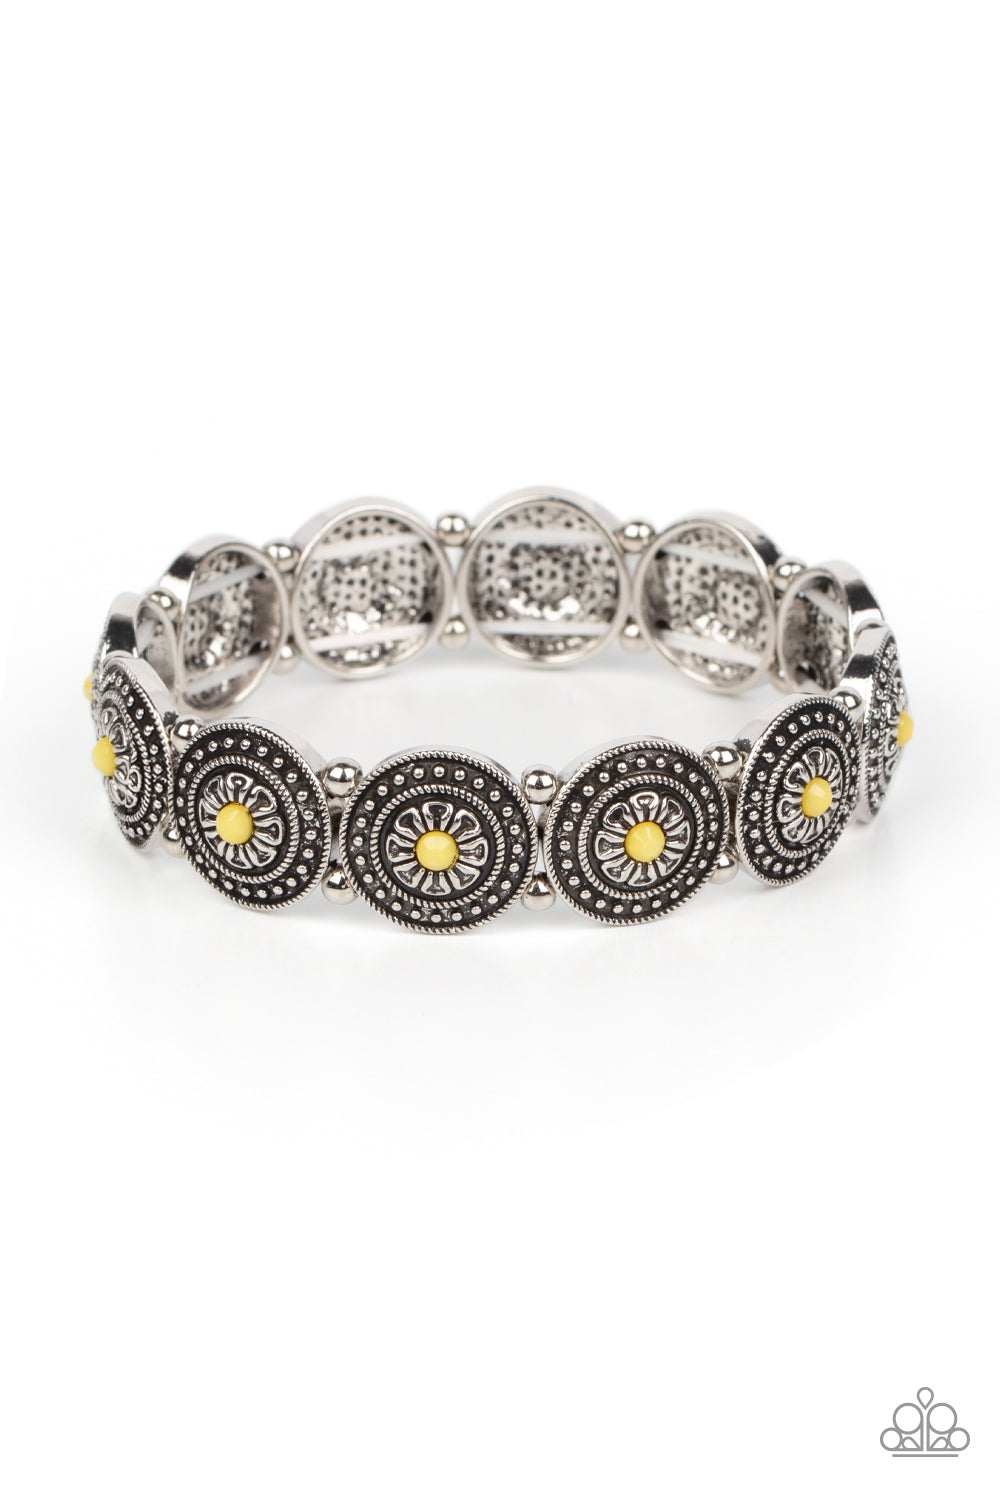 Granada Garden Party - Yellow and Silver Stretchy Bracelet - Paparazzi Accessories  - Collection of floral silver frames alternate with dainty silver beads along stretchy bands around the wrist for a whimsical colorful yellow bracelet.